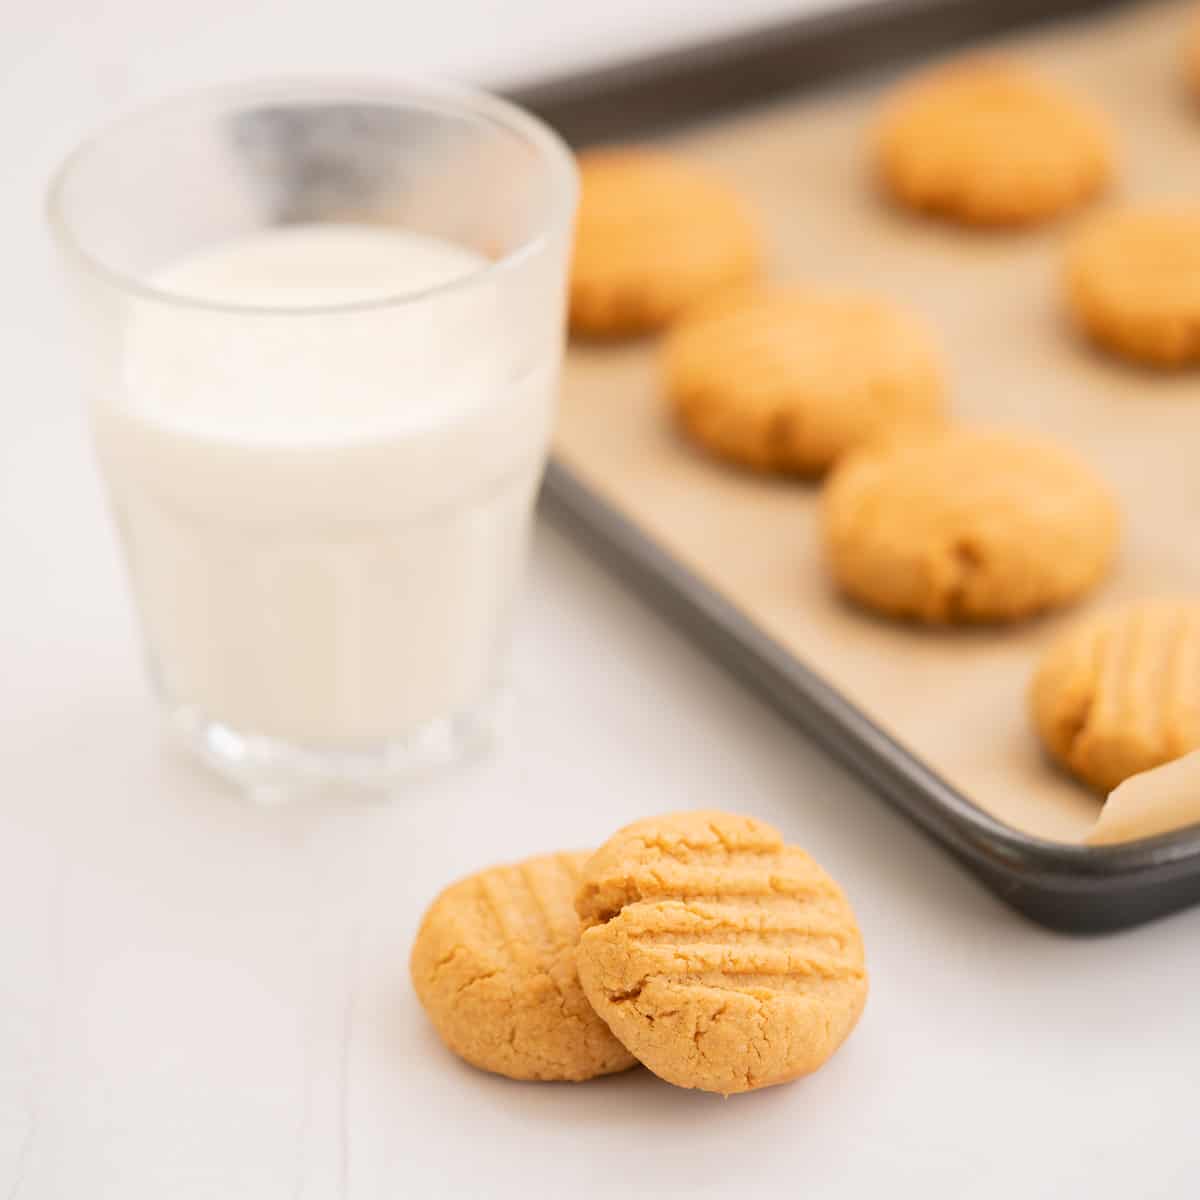 Two cookies next to a glass of milk.